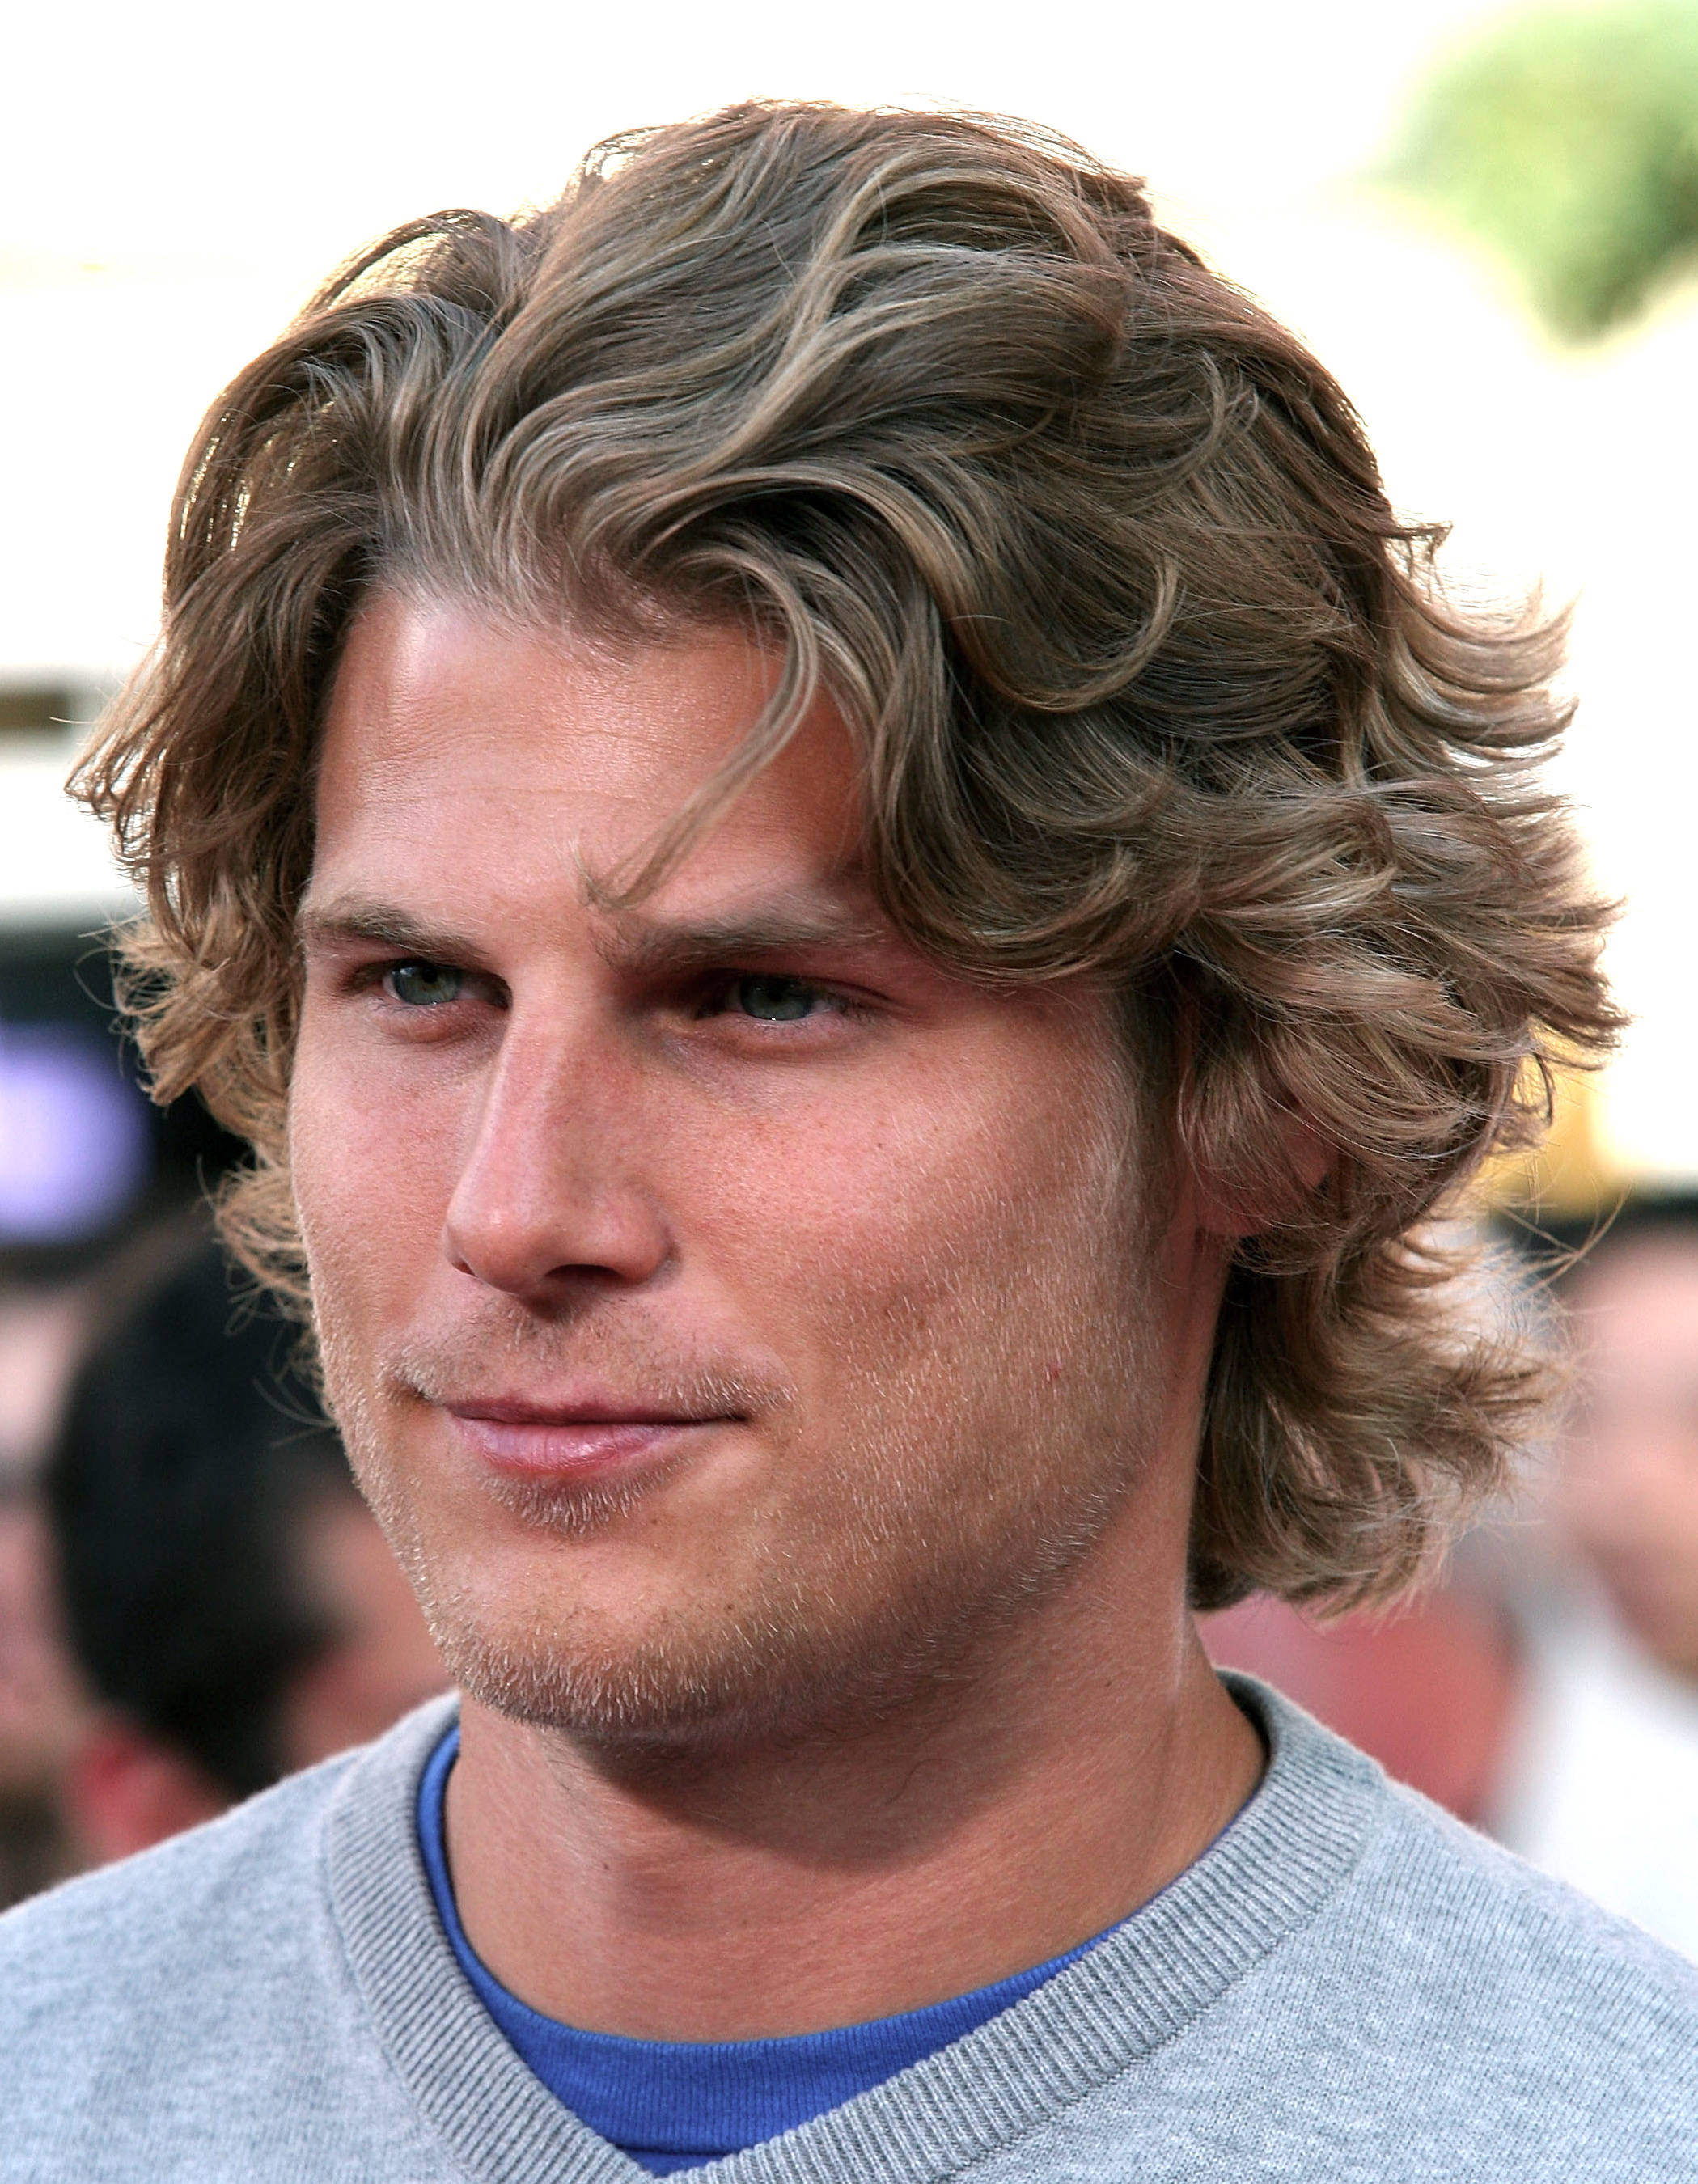 Curly Hairstyles for Men with Long Hair